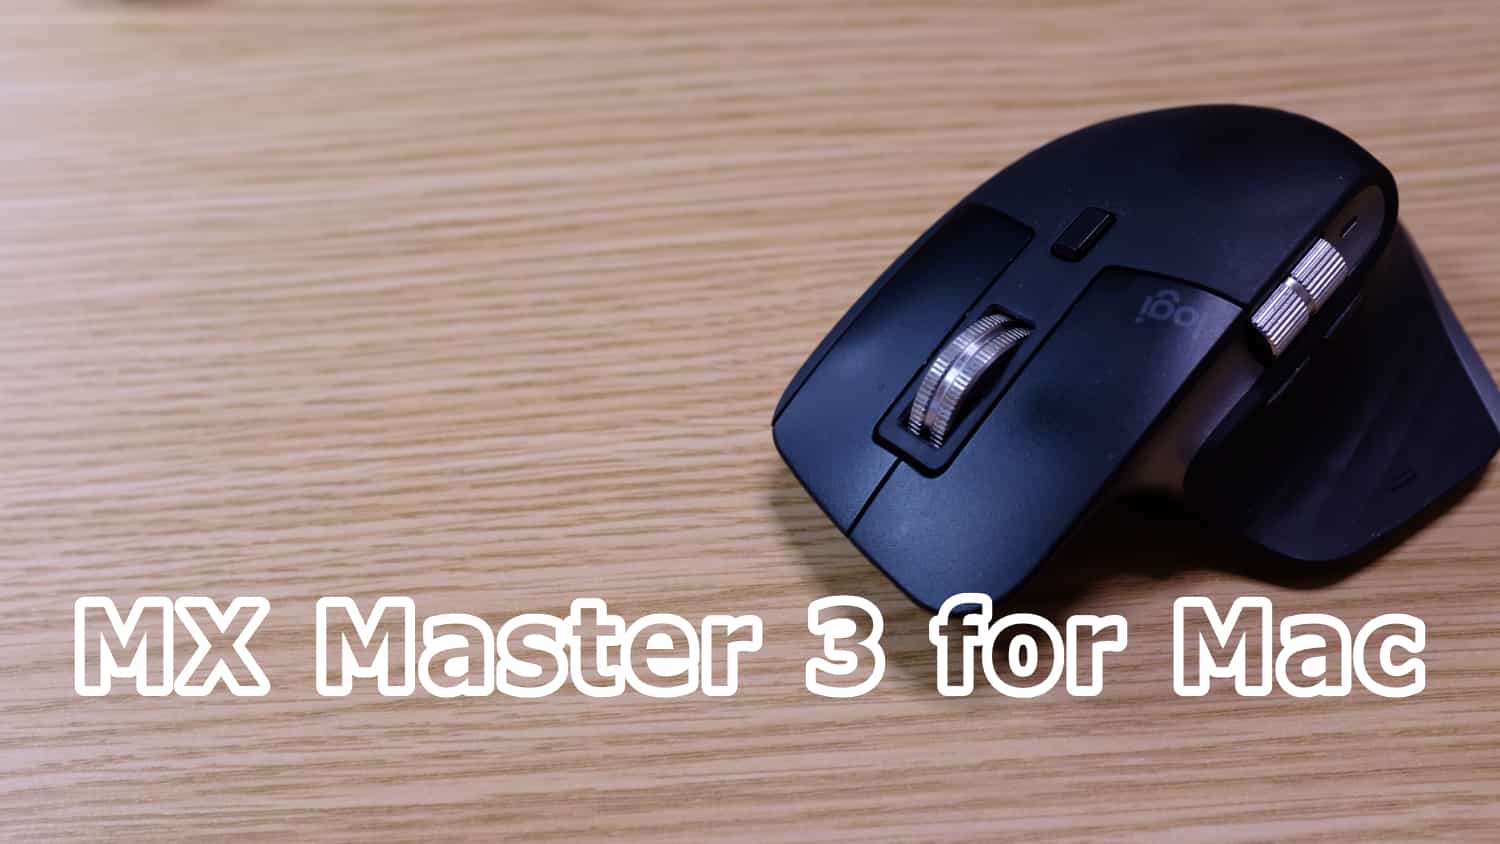 MX Master 3 for Mac